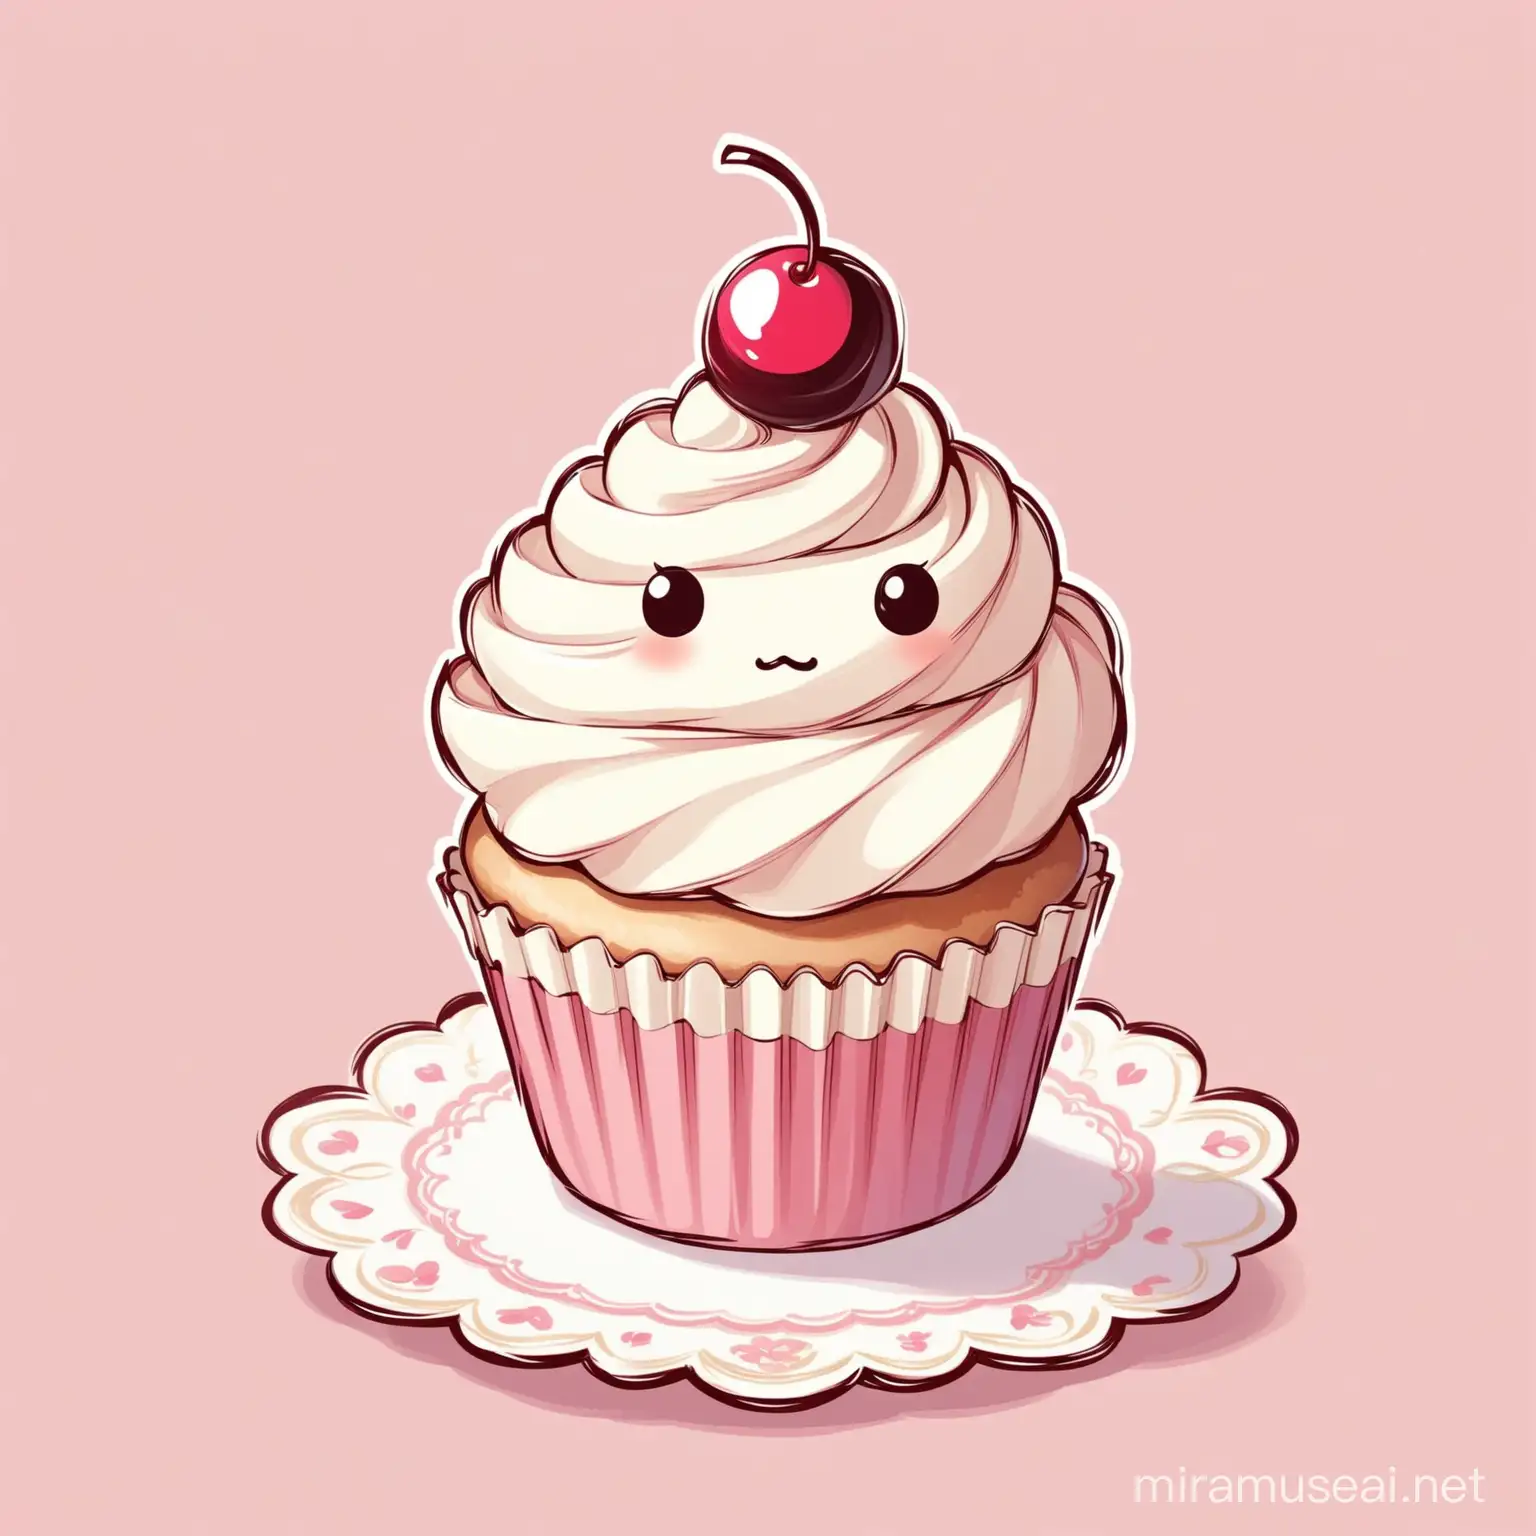 Elegant and Cute Cupcake without Eyes